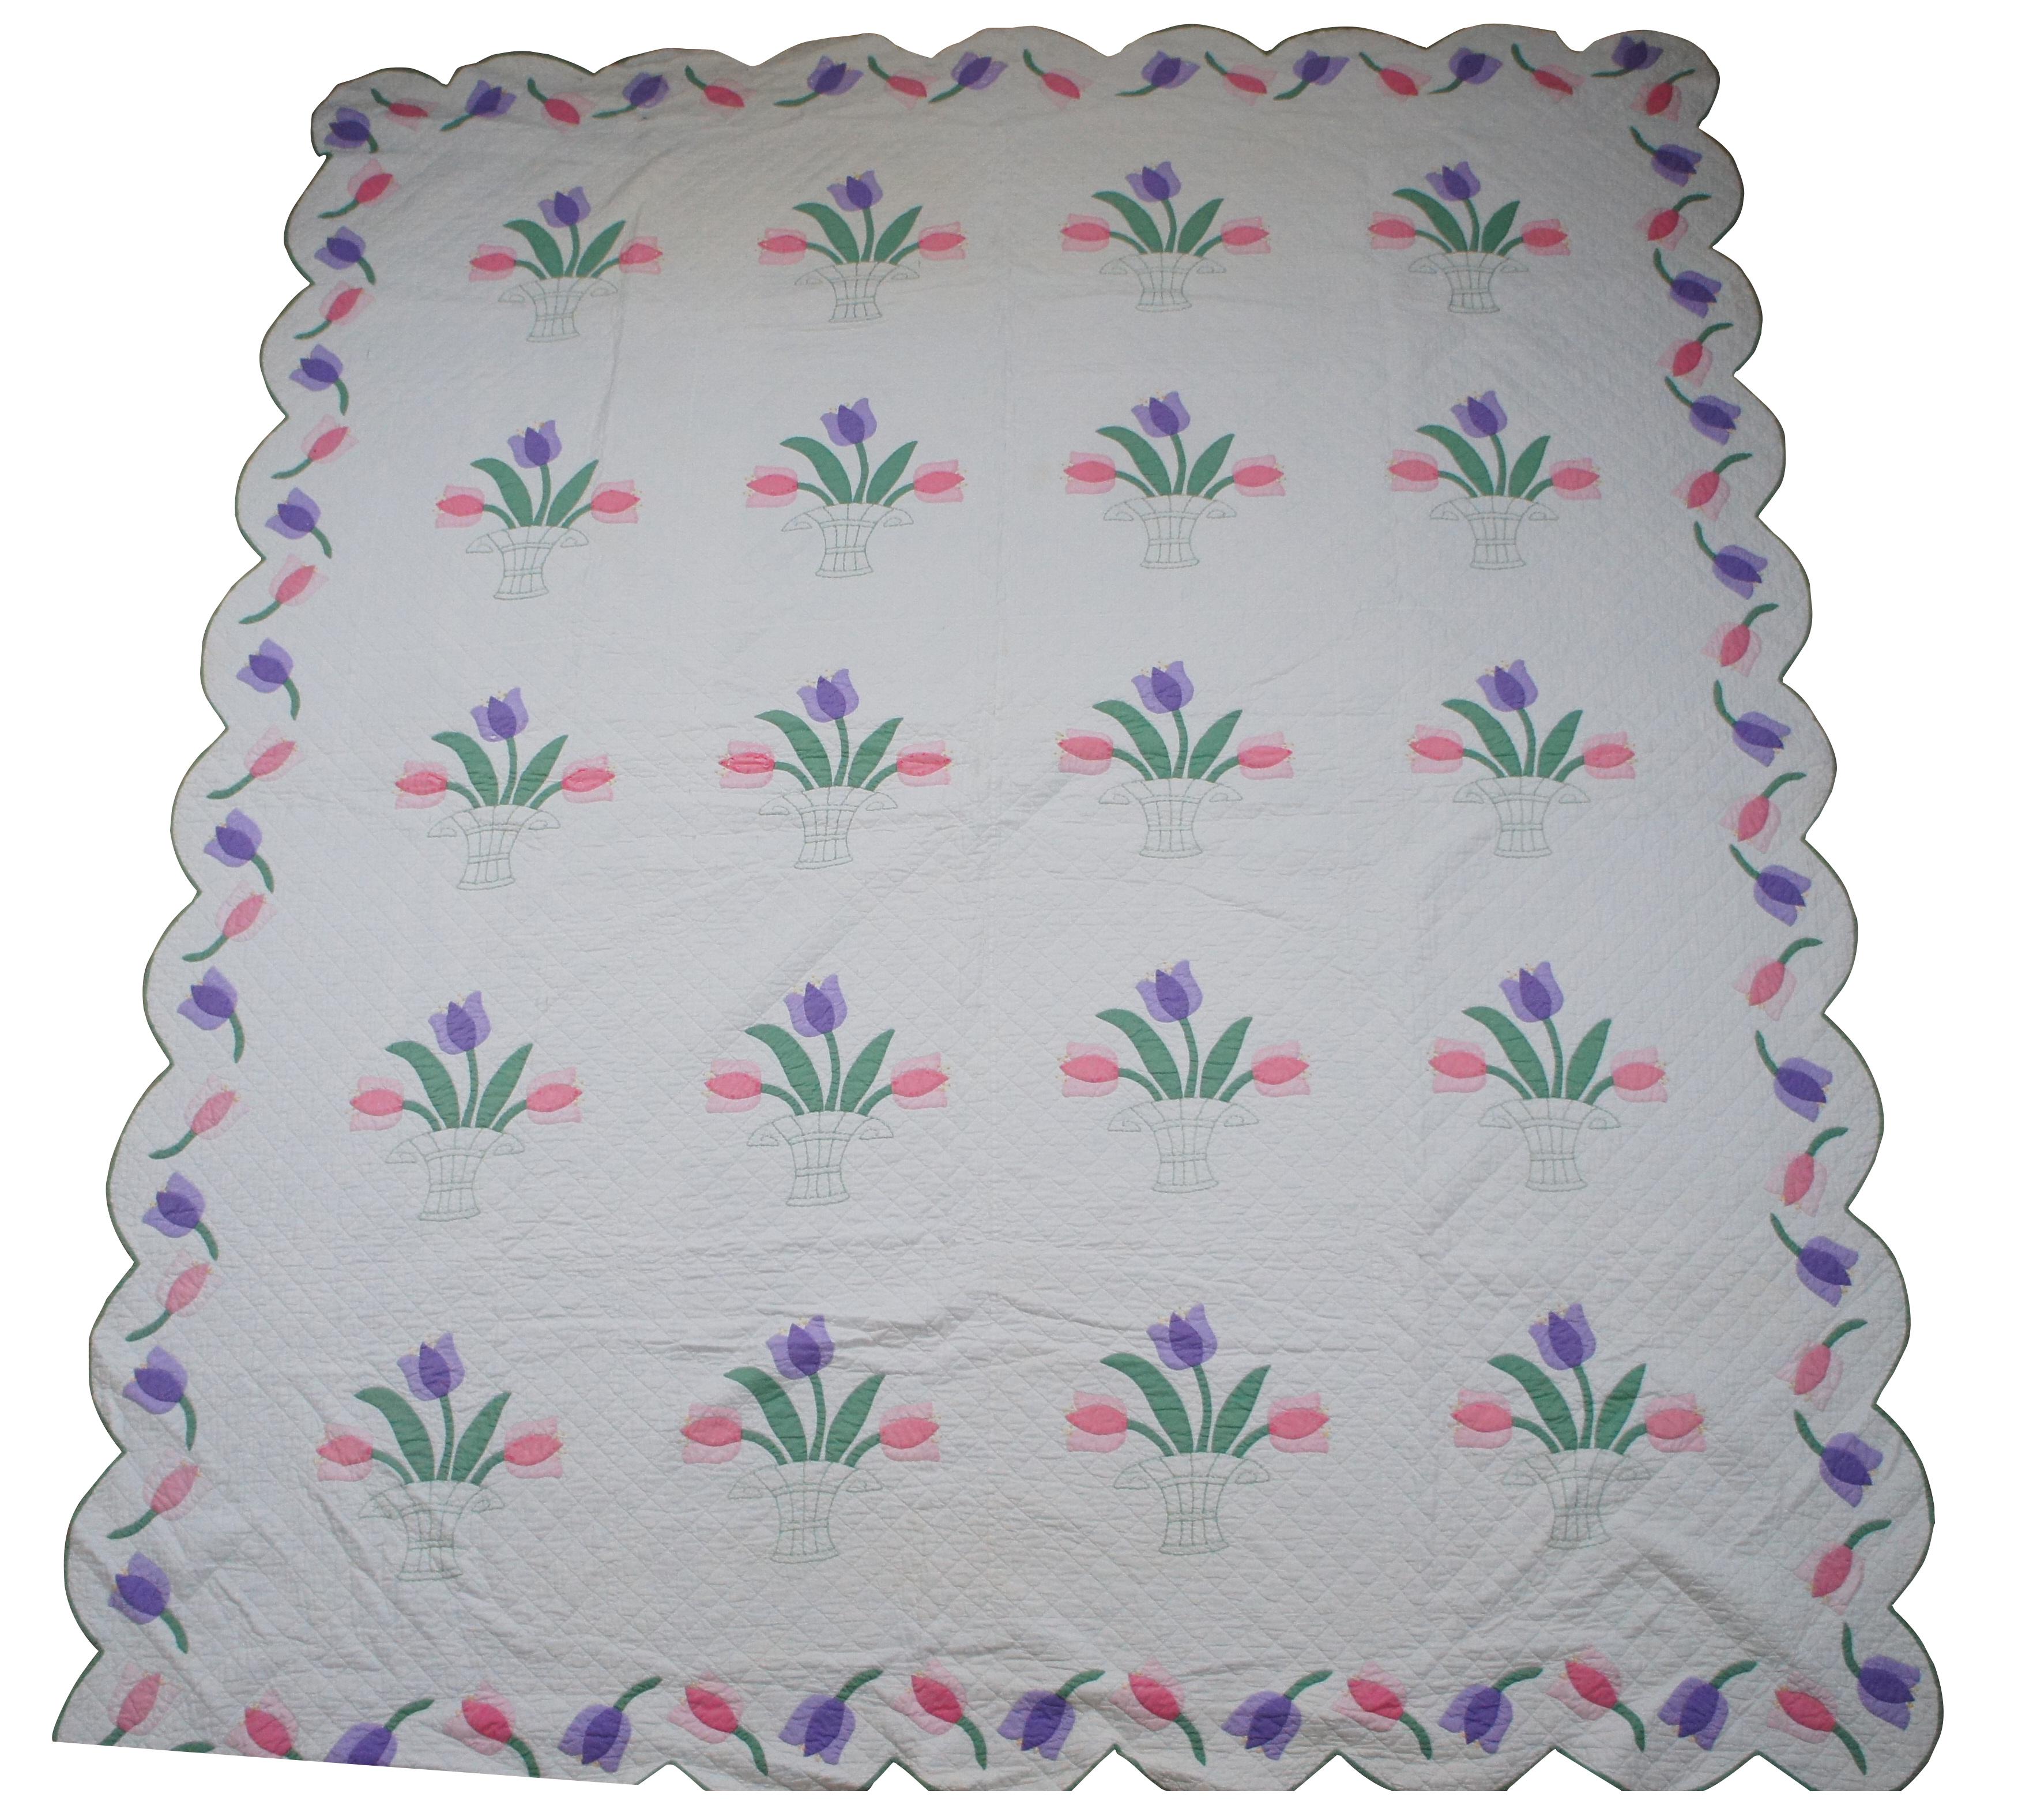 Vintage hand stitched white bedspread / blanket / coverlet / quilt with applique pink and purple tulips in embroidered baskets and loose tulips along the scalloped edge. Measure: 93